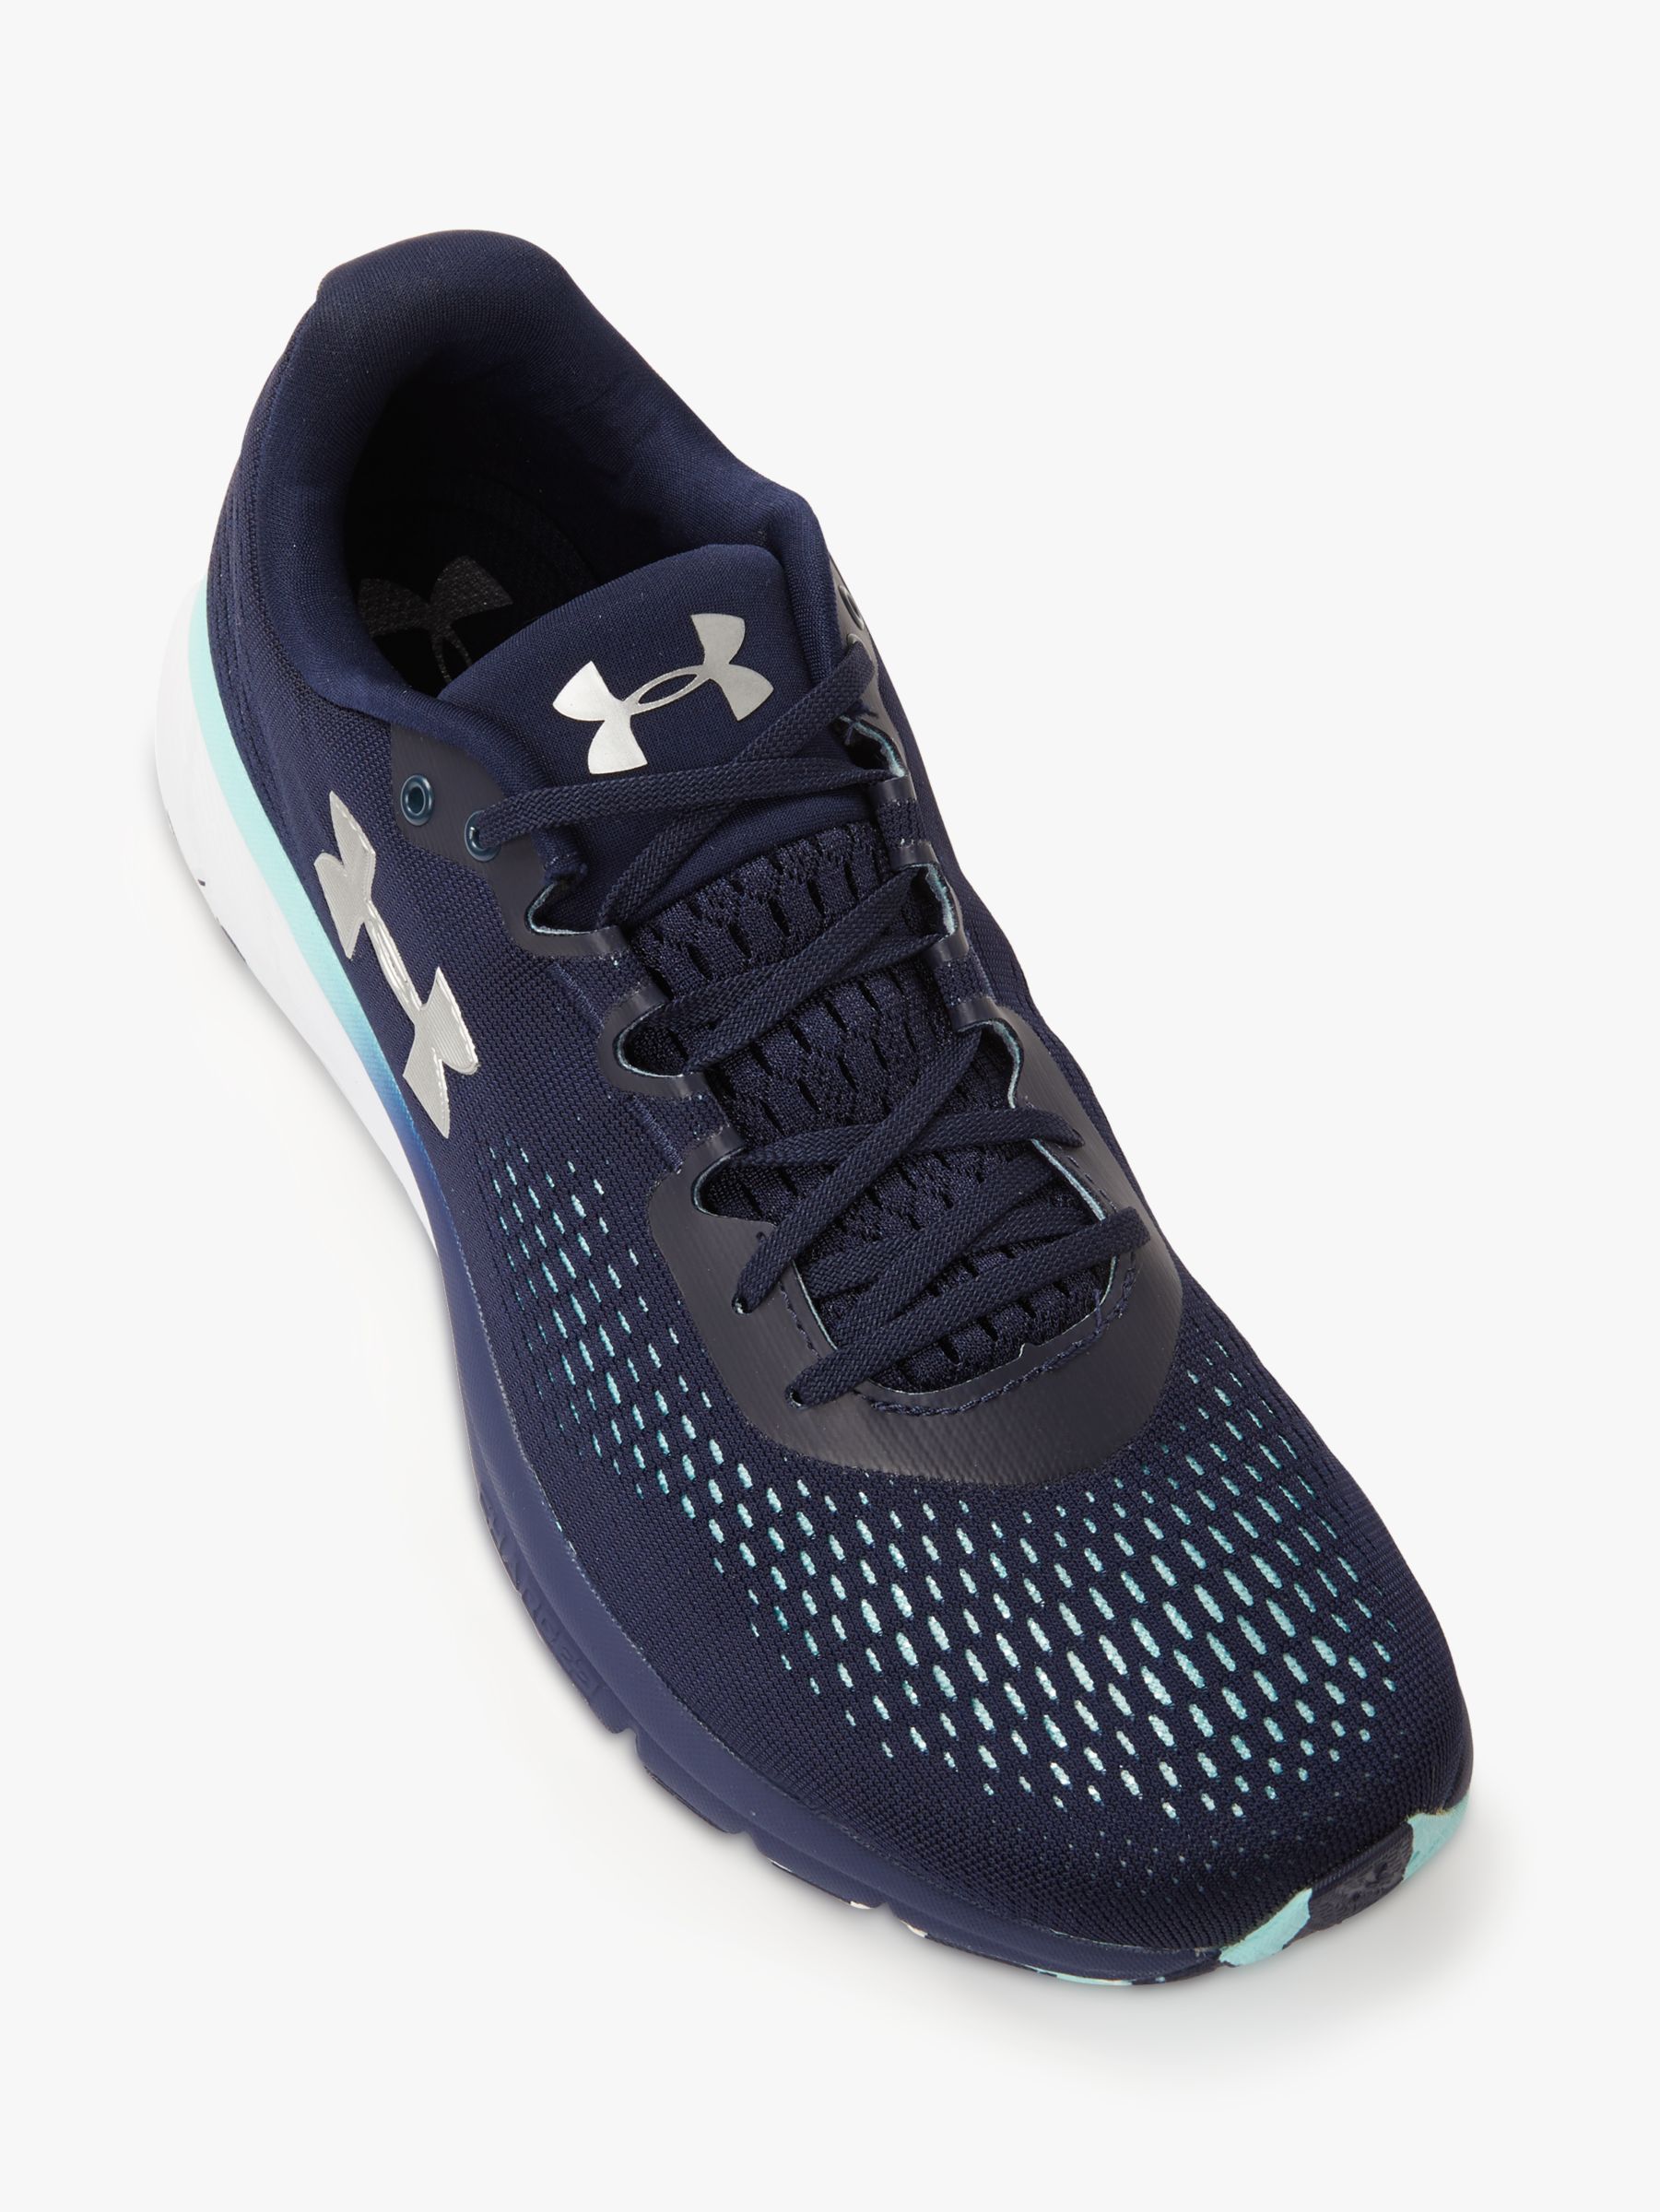 Under Armour Charged Spark Women's 